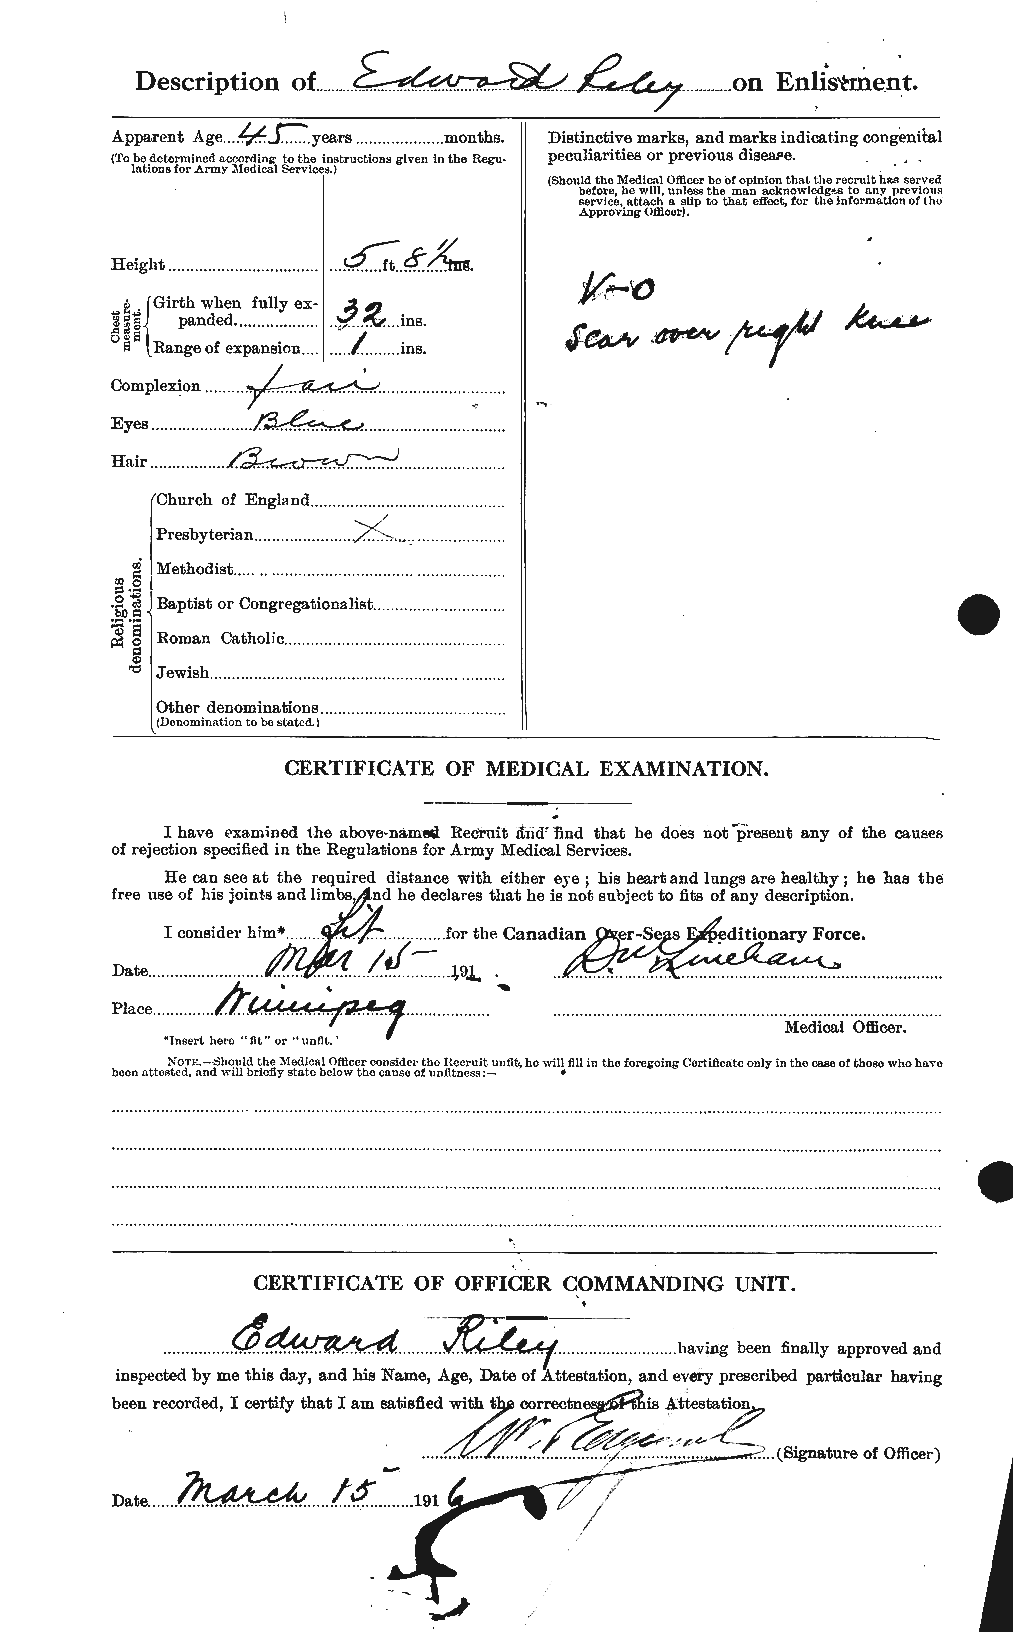 Personnel Records of the First World War - CEF 604628b